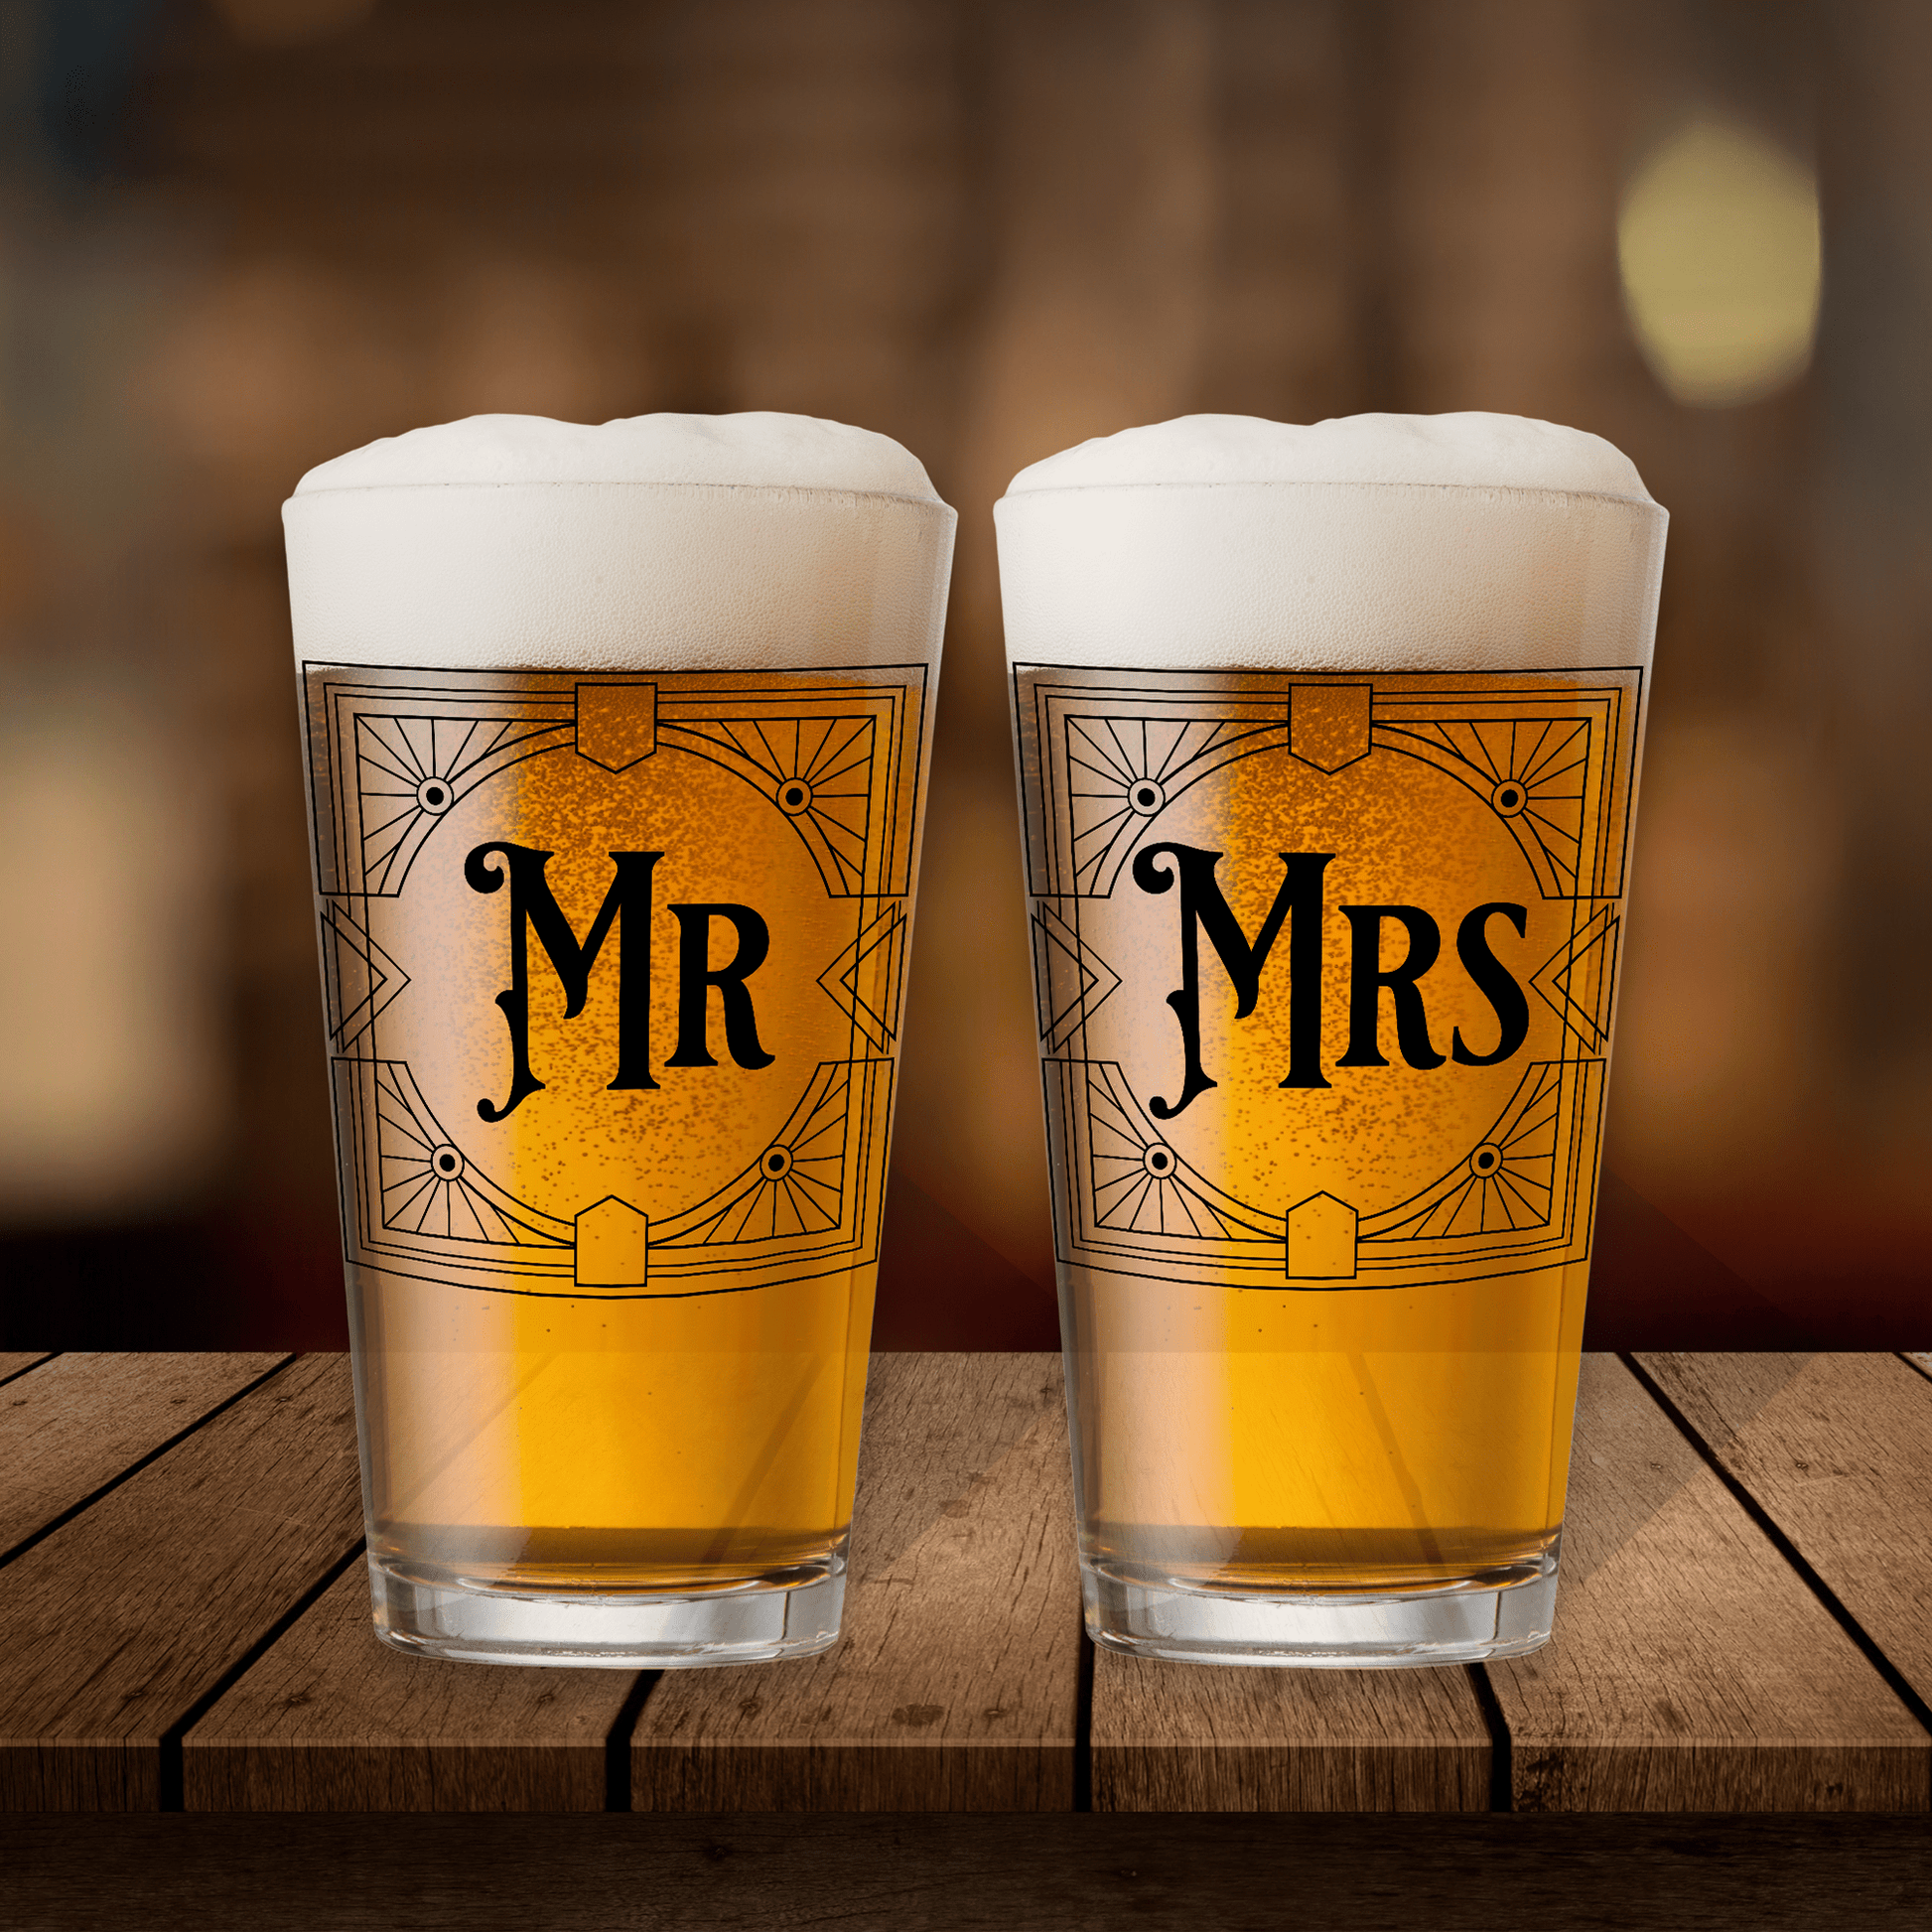 Mr Personalized 16oz Classic Pint Glass Collection for Wedding Party Favors and Gifts - Expressive DeZien 